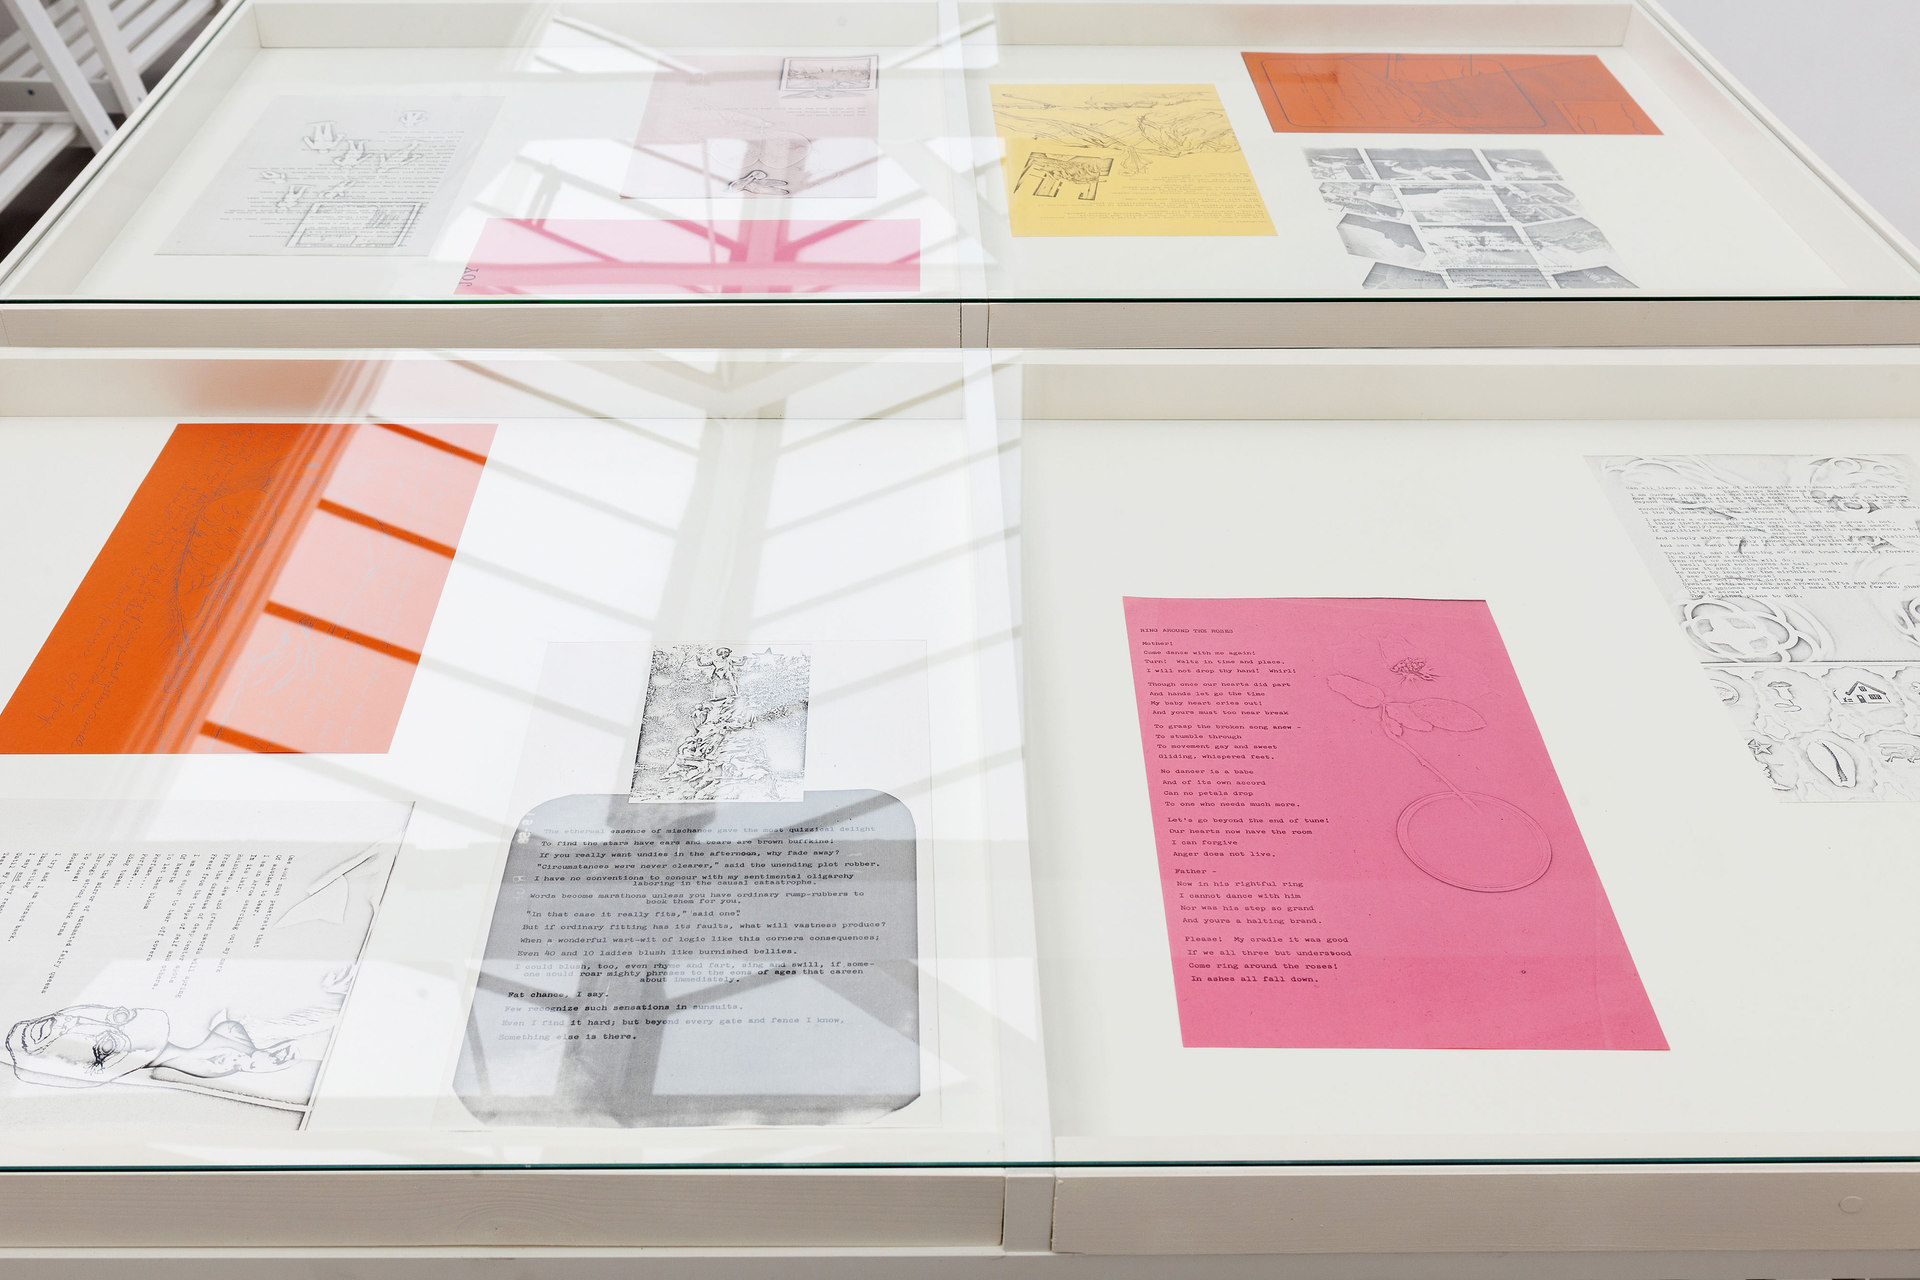 Barbara T Smith, The Poetry Sets, 1965-66, Installation View, 2015, Cell Project Space